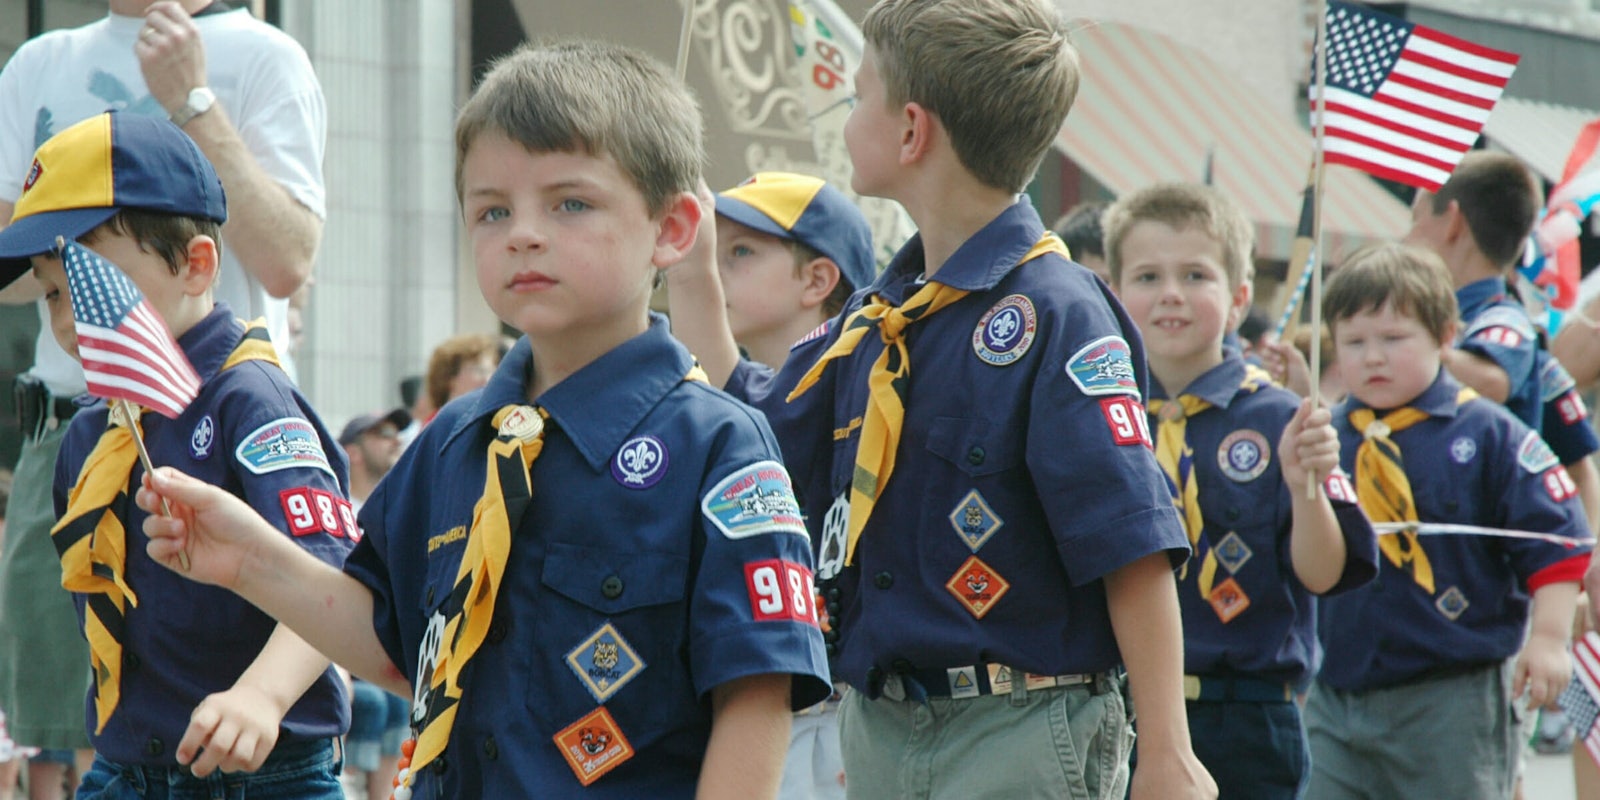 The Boy Scouts is changing its name to Scouts BSA, and some men aren't happy.